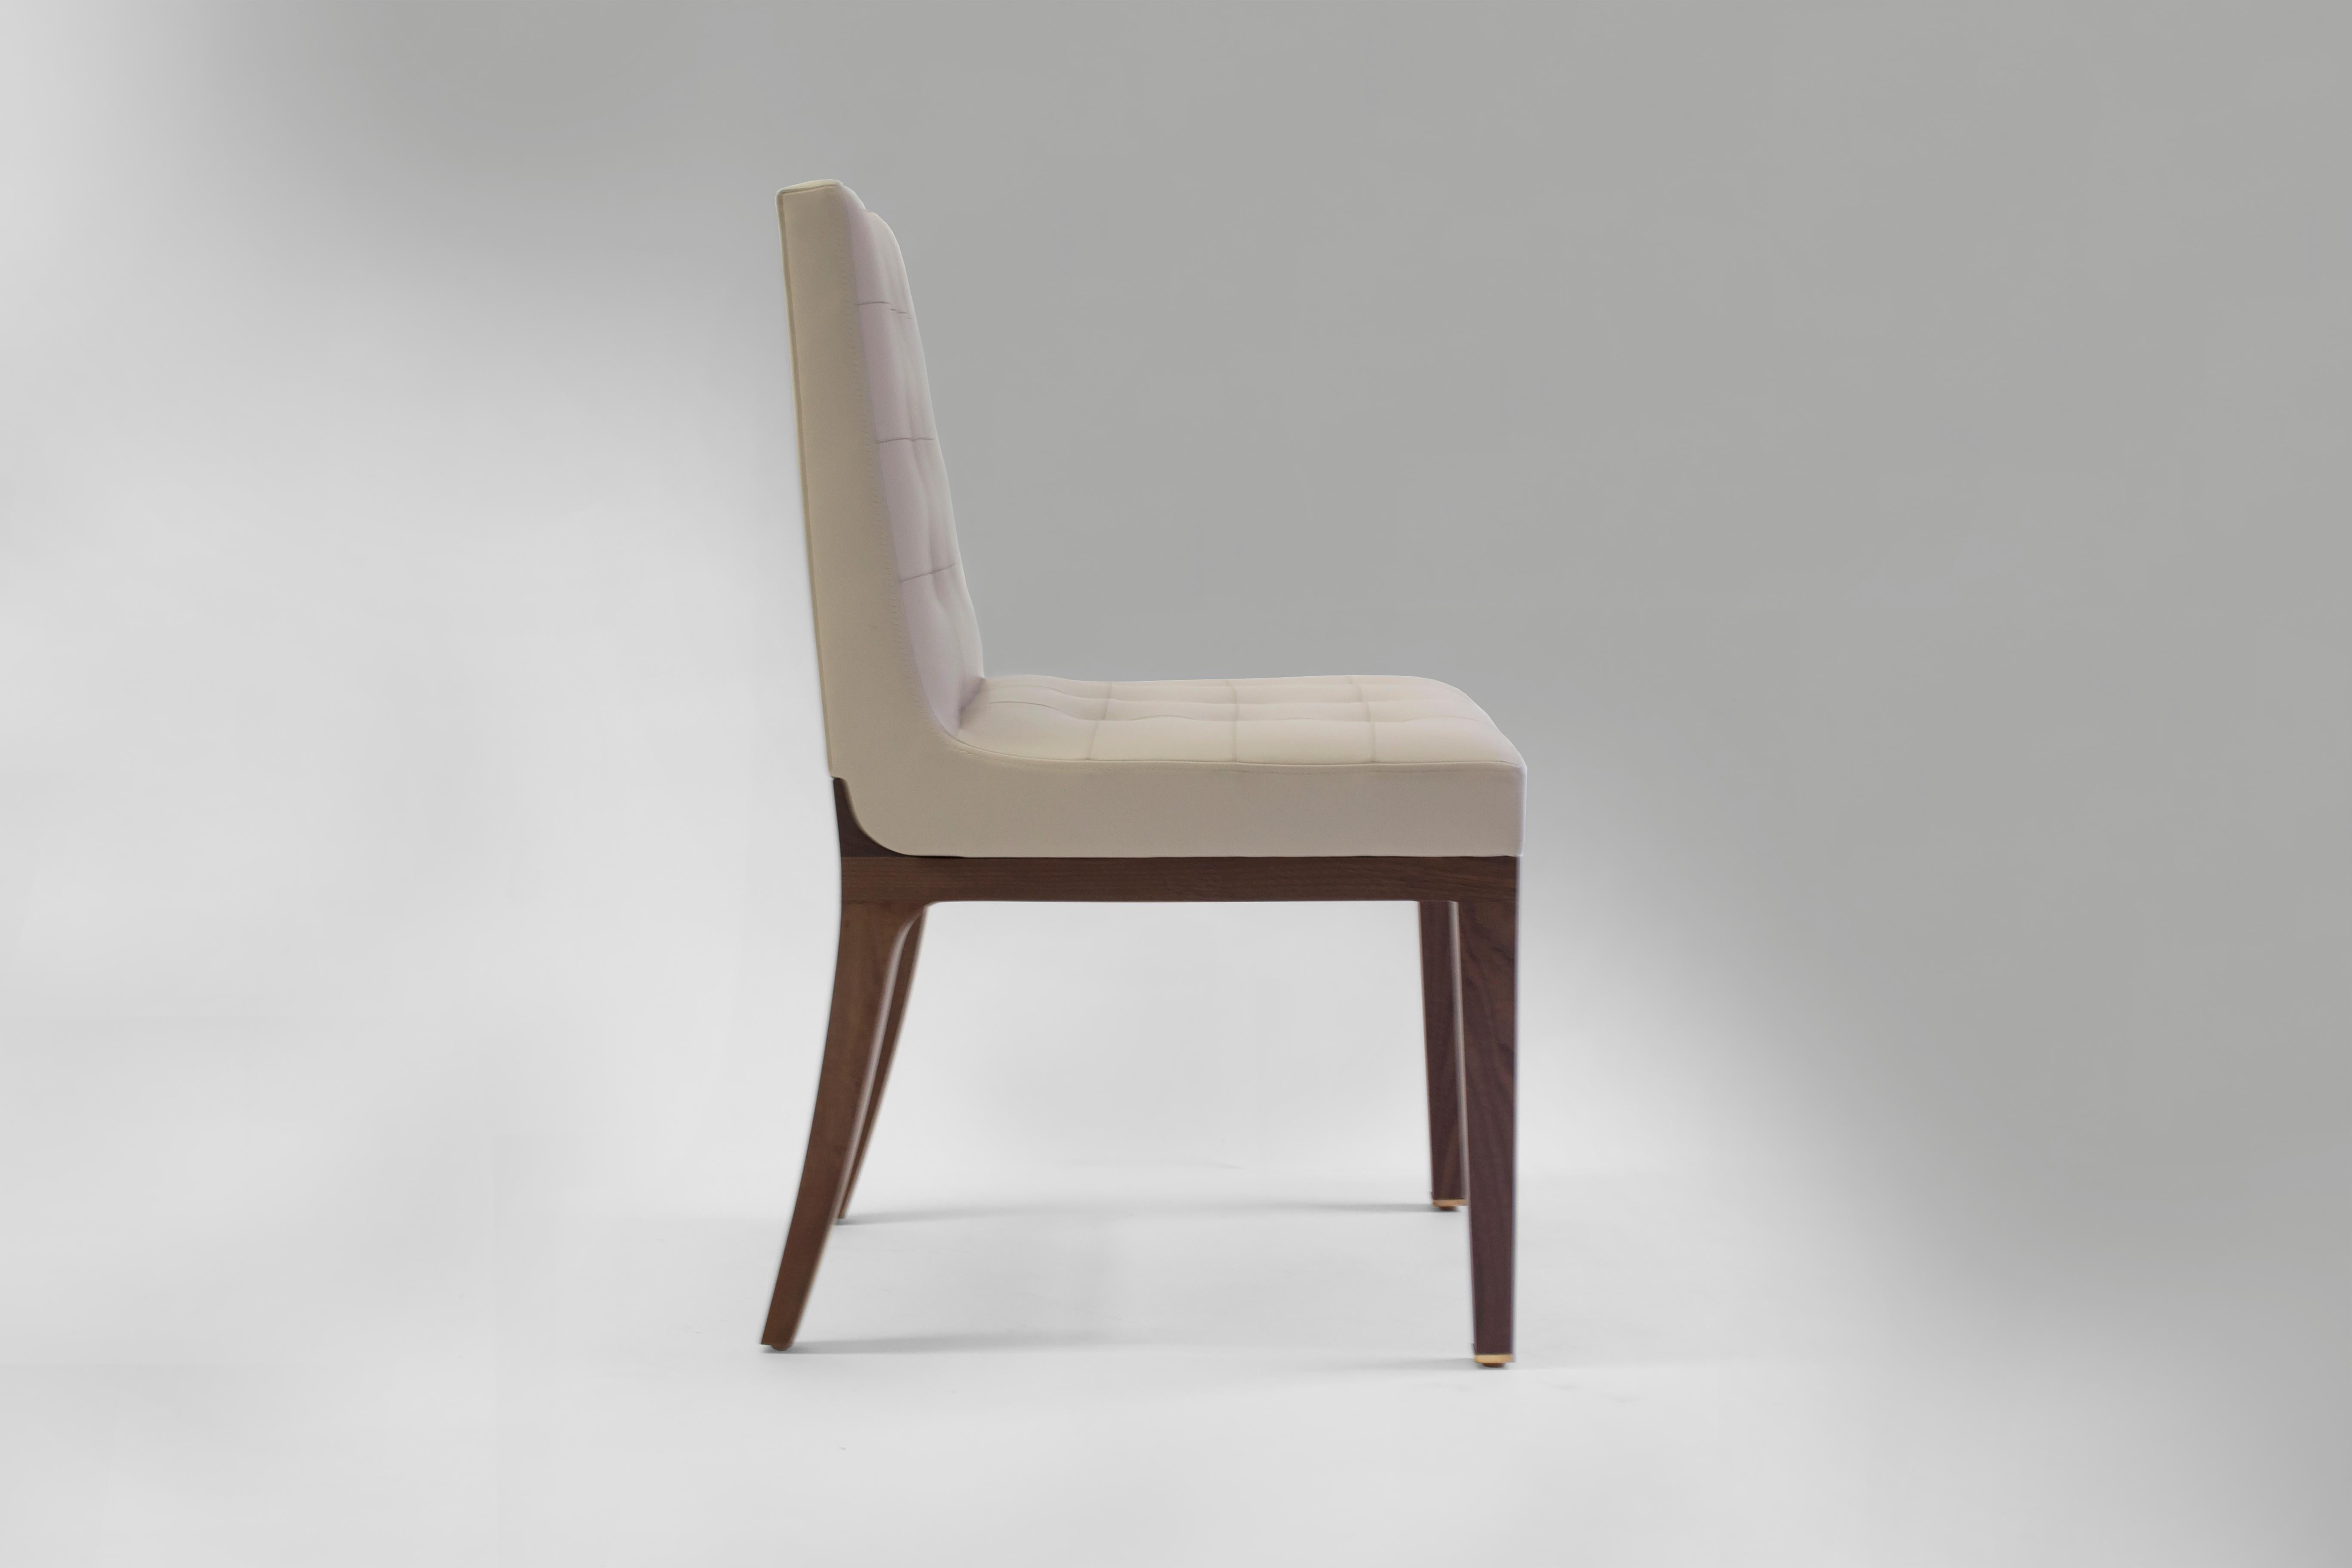 The Corbin side chair can be used as a dining chair, desk chair or an occasional chair - currently covered in tan leather with bisquit tufting on inside back with hand stitching in each tuft. Wood frame and legs made and finished in medium oak, also